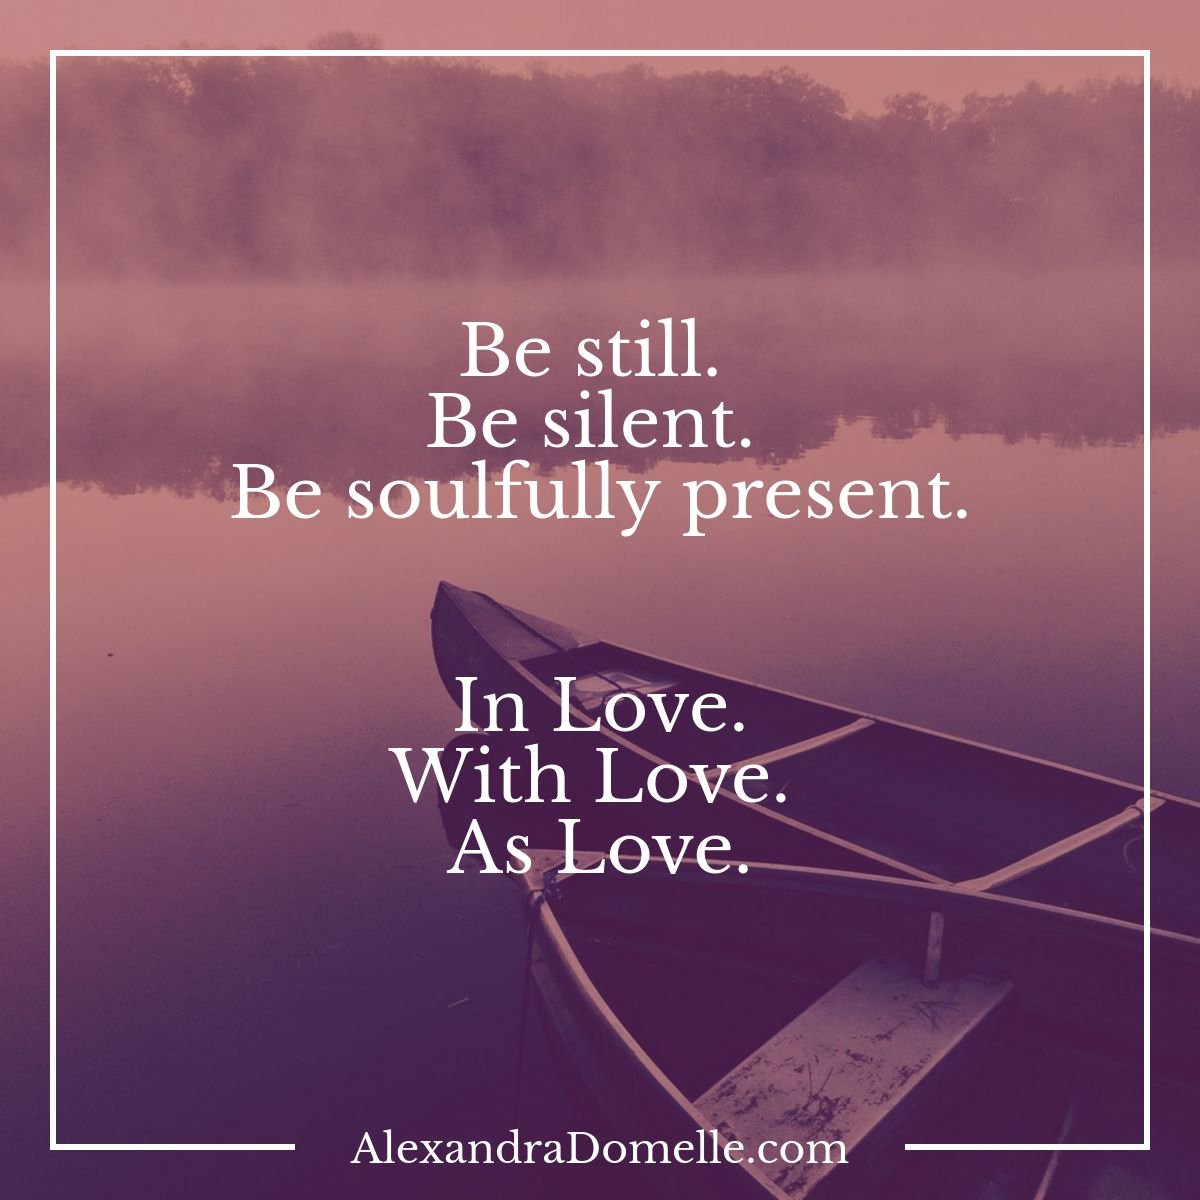 Be still. Be silent. Be soulfully present. In Love. With Love. As #Love. - Alexandra Domelle #IQRTG #IAmChoosingLove #Mindfulness #TheMindfulMoment #PresentMomentReminder #Meditation